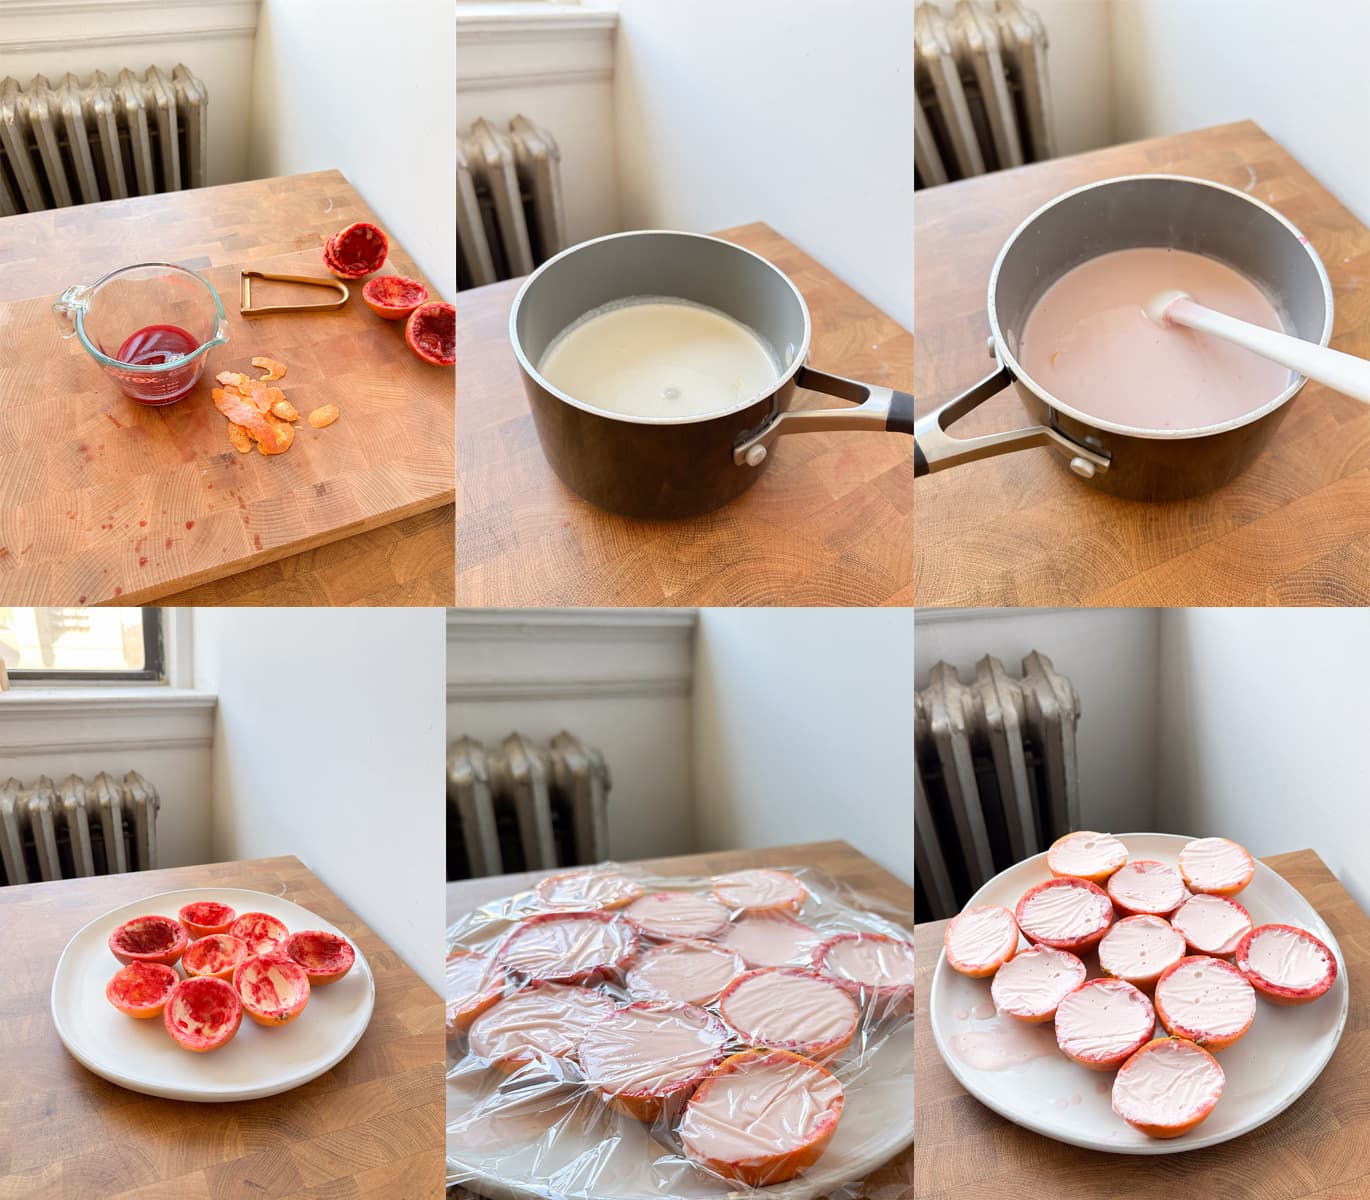 Step by step images showing how to cook and assemble blood orange possets.